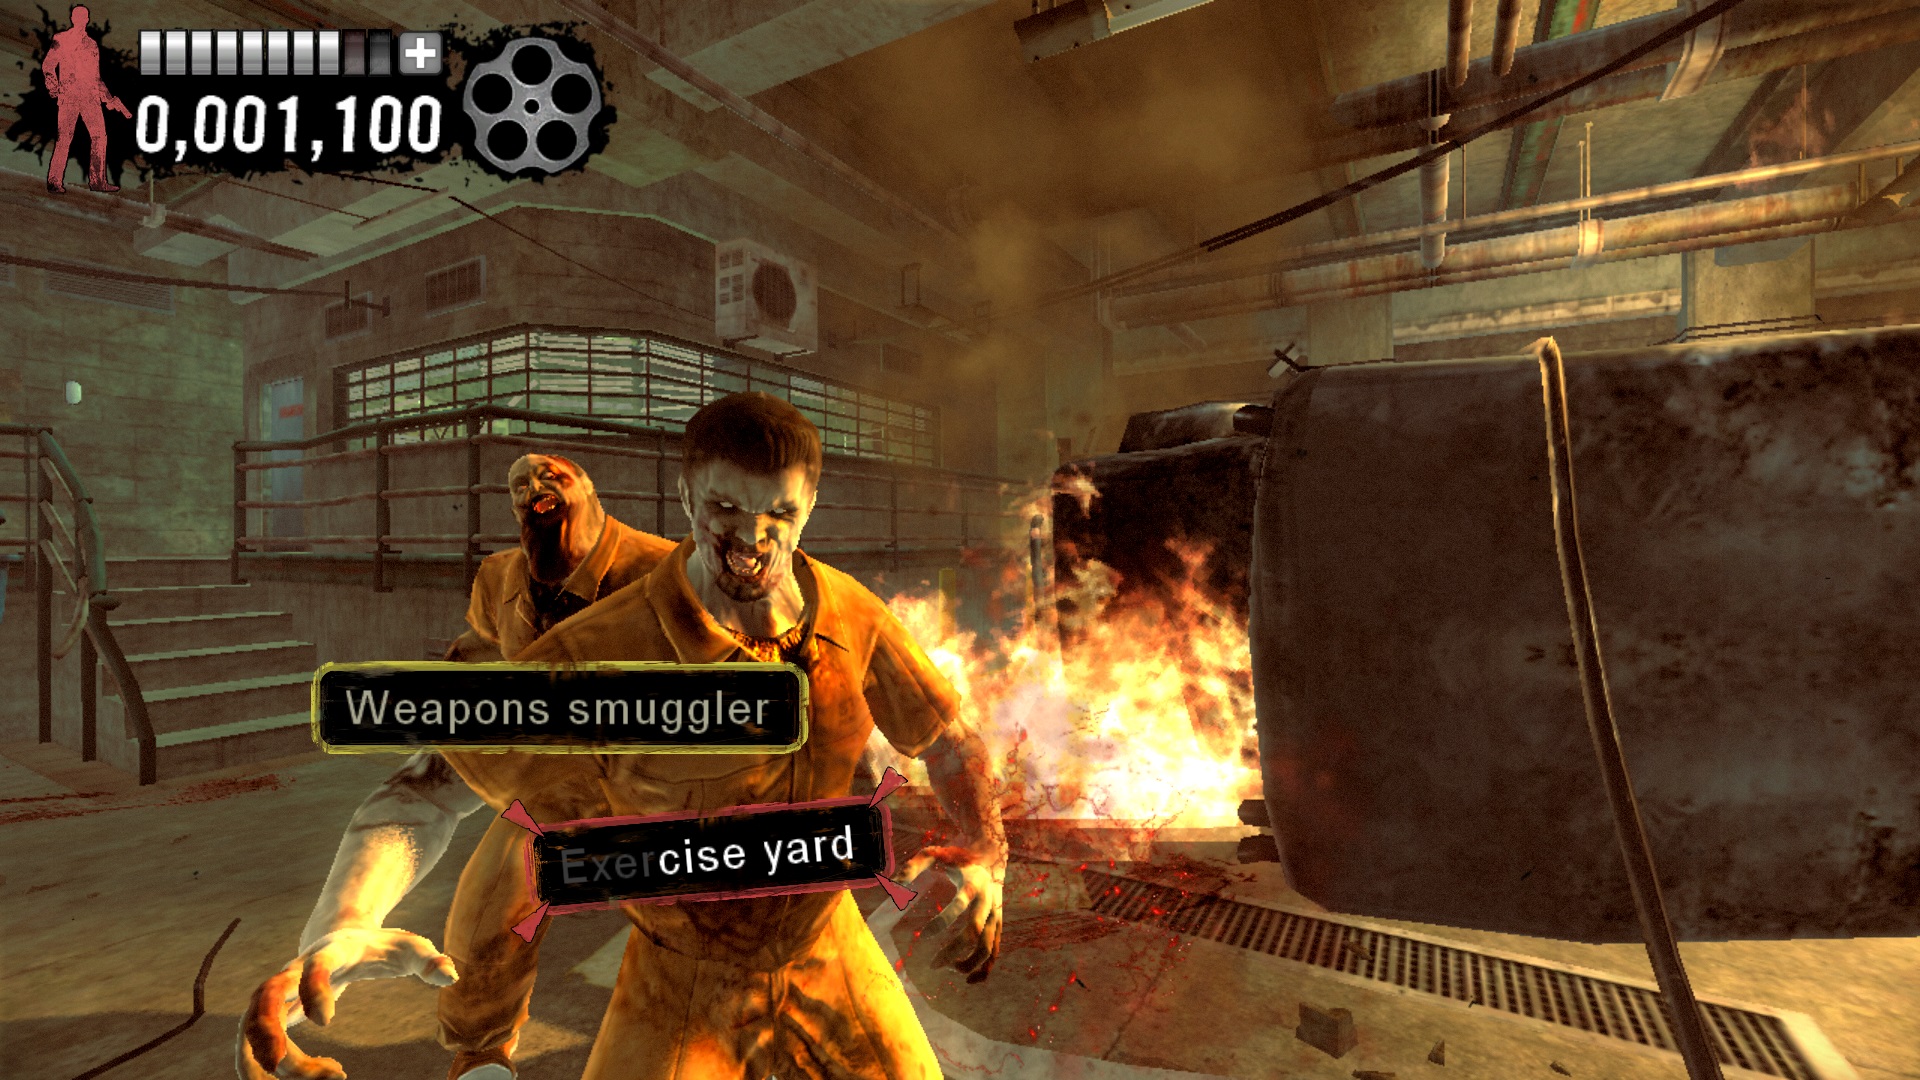 The Typing of The Dead: Overkill screenshot